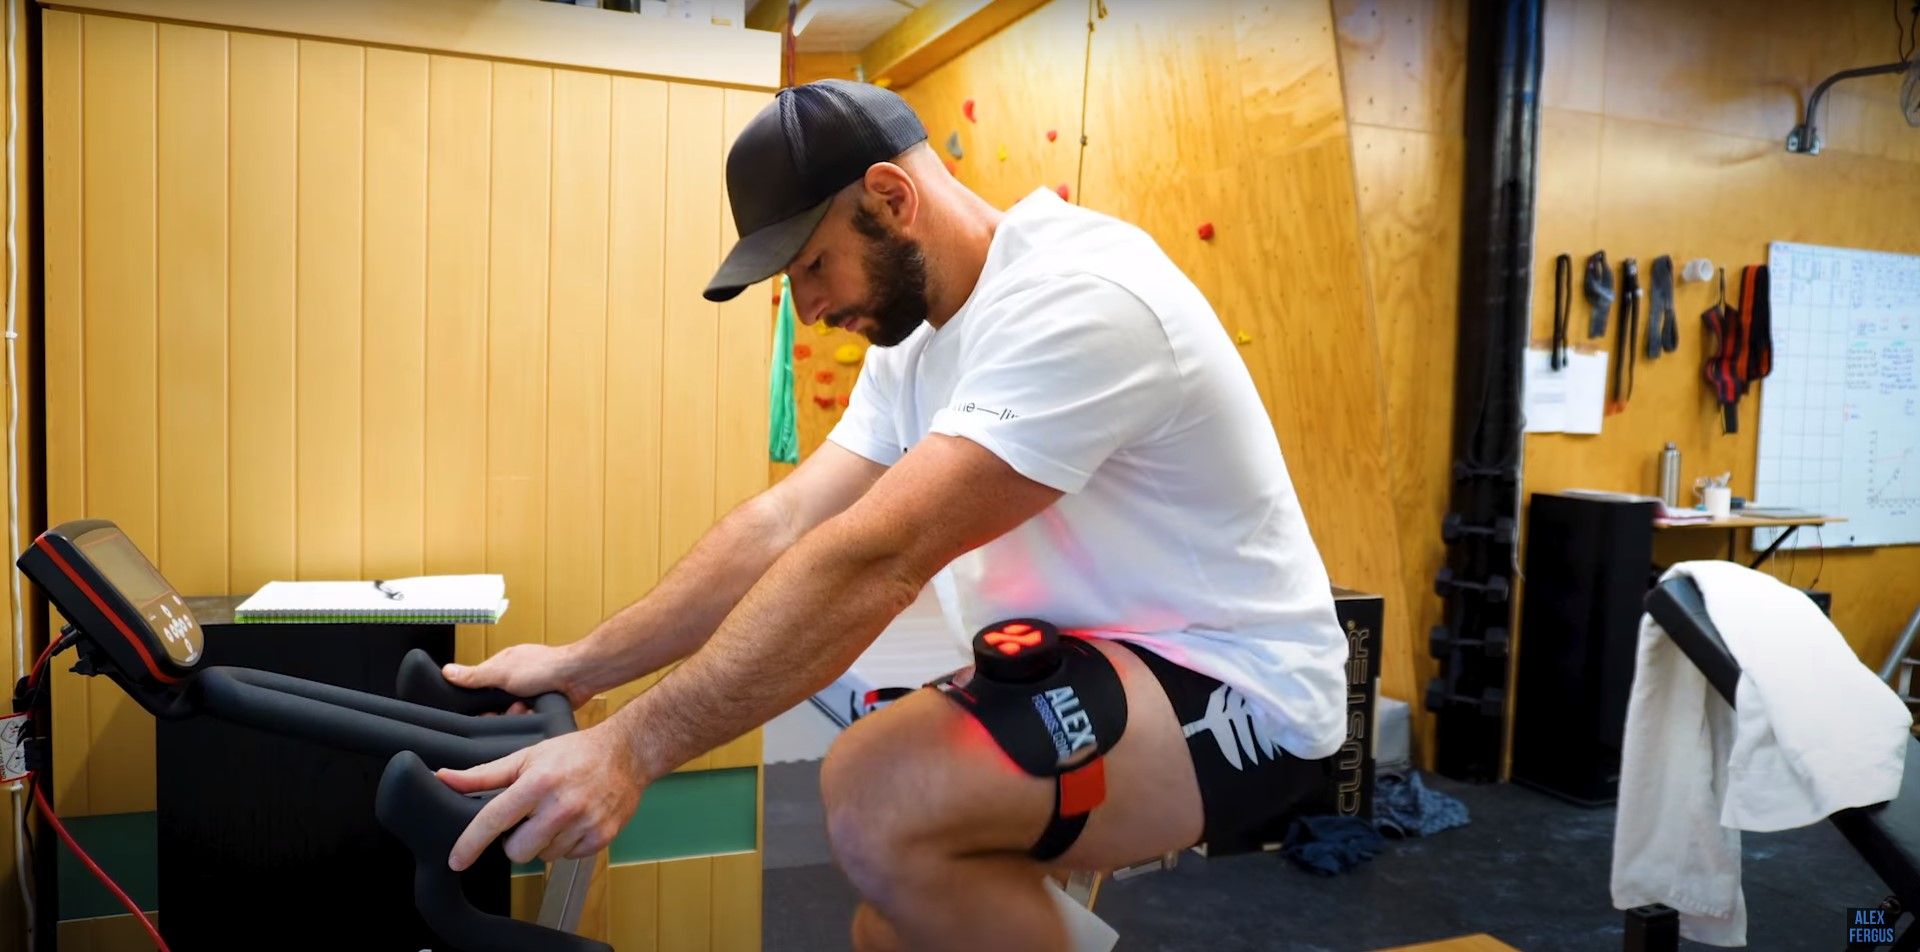 Alex Fergus using a red light therapy product on his thigh while using a stationary bike at home